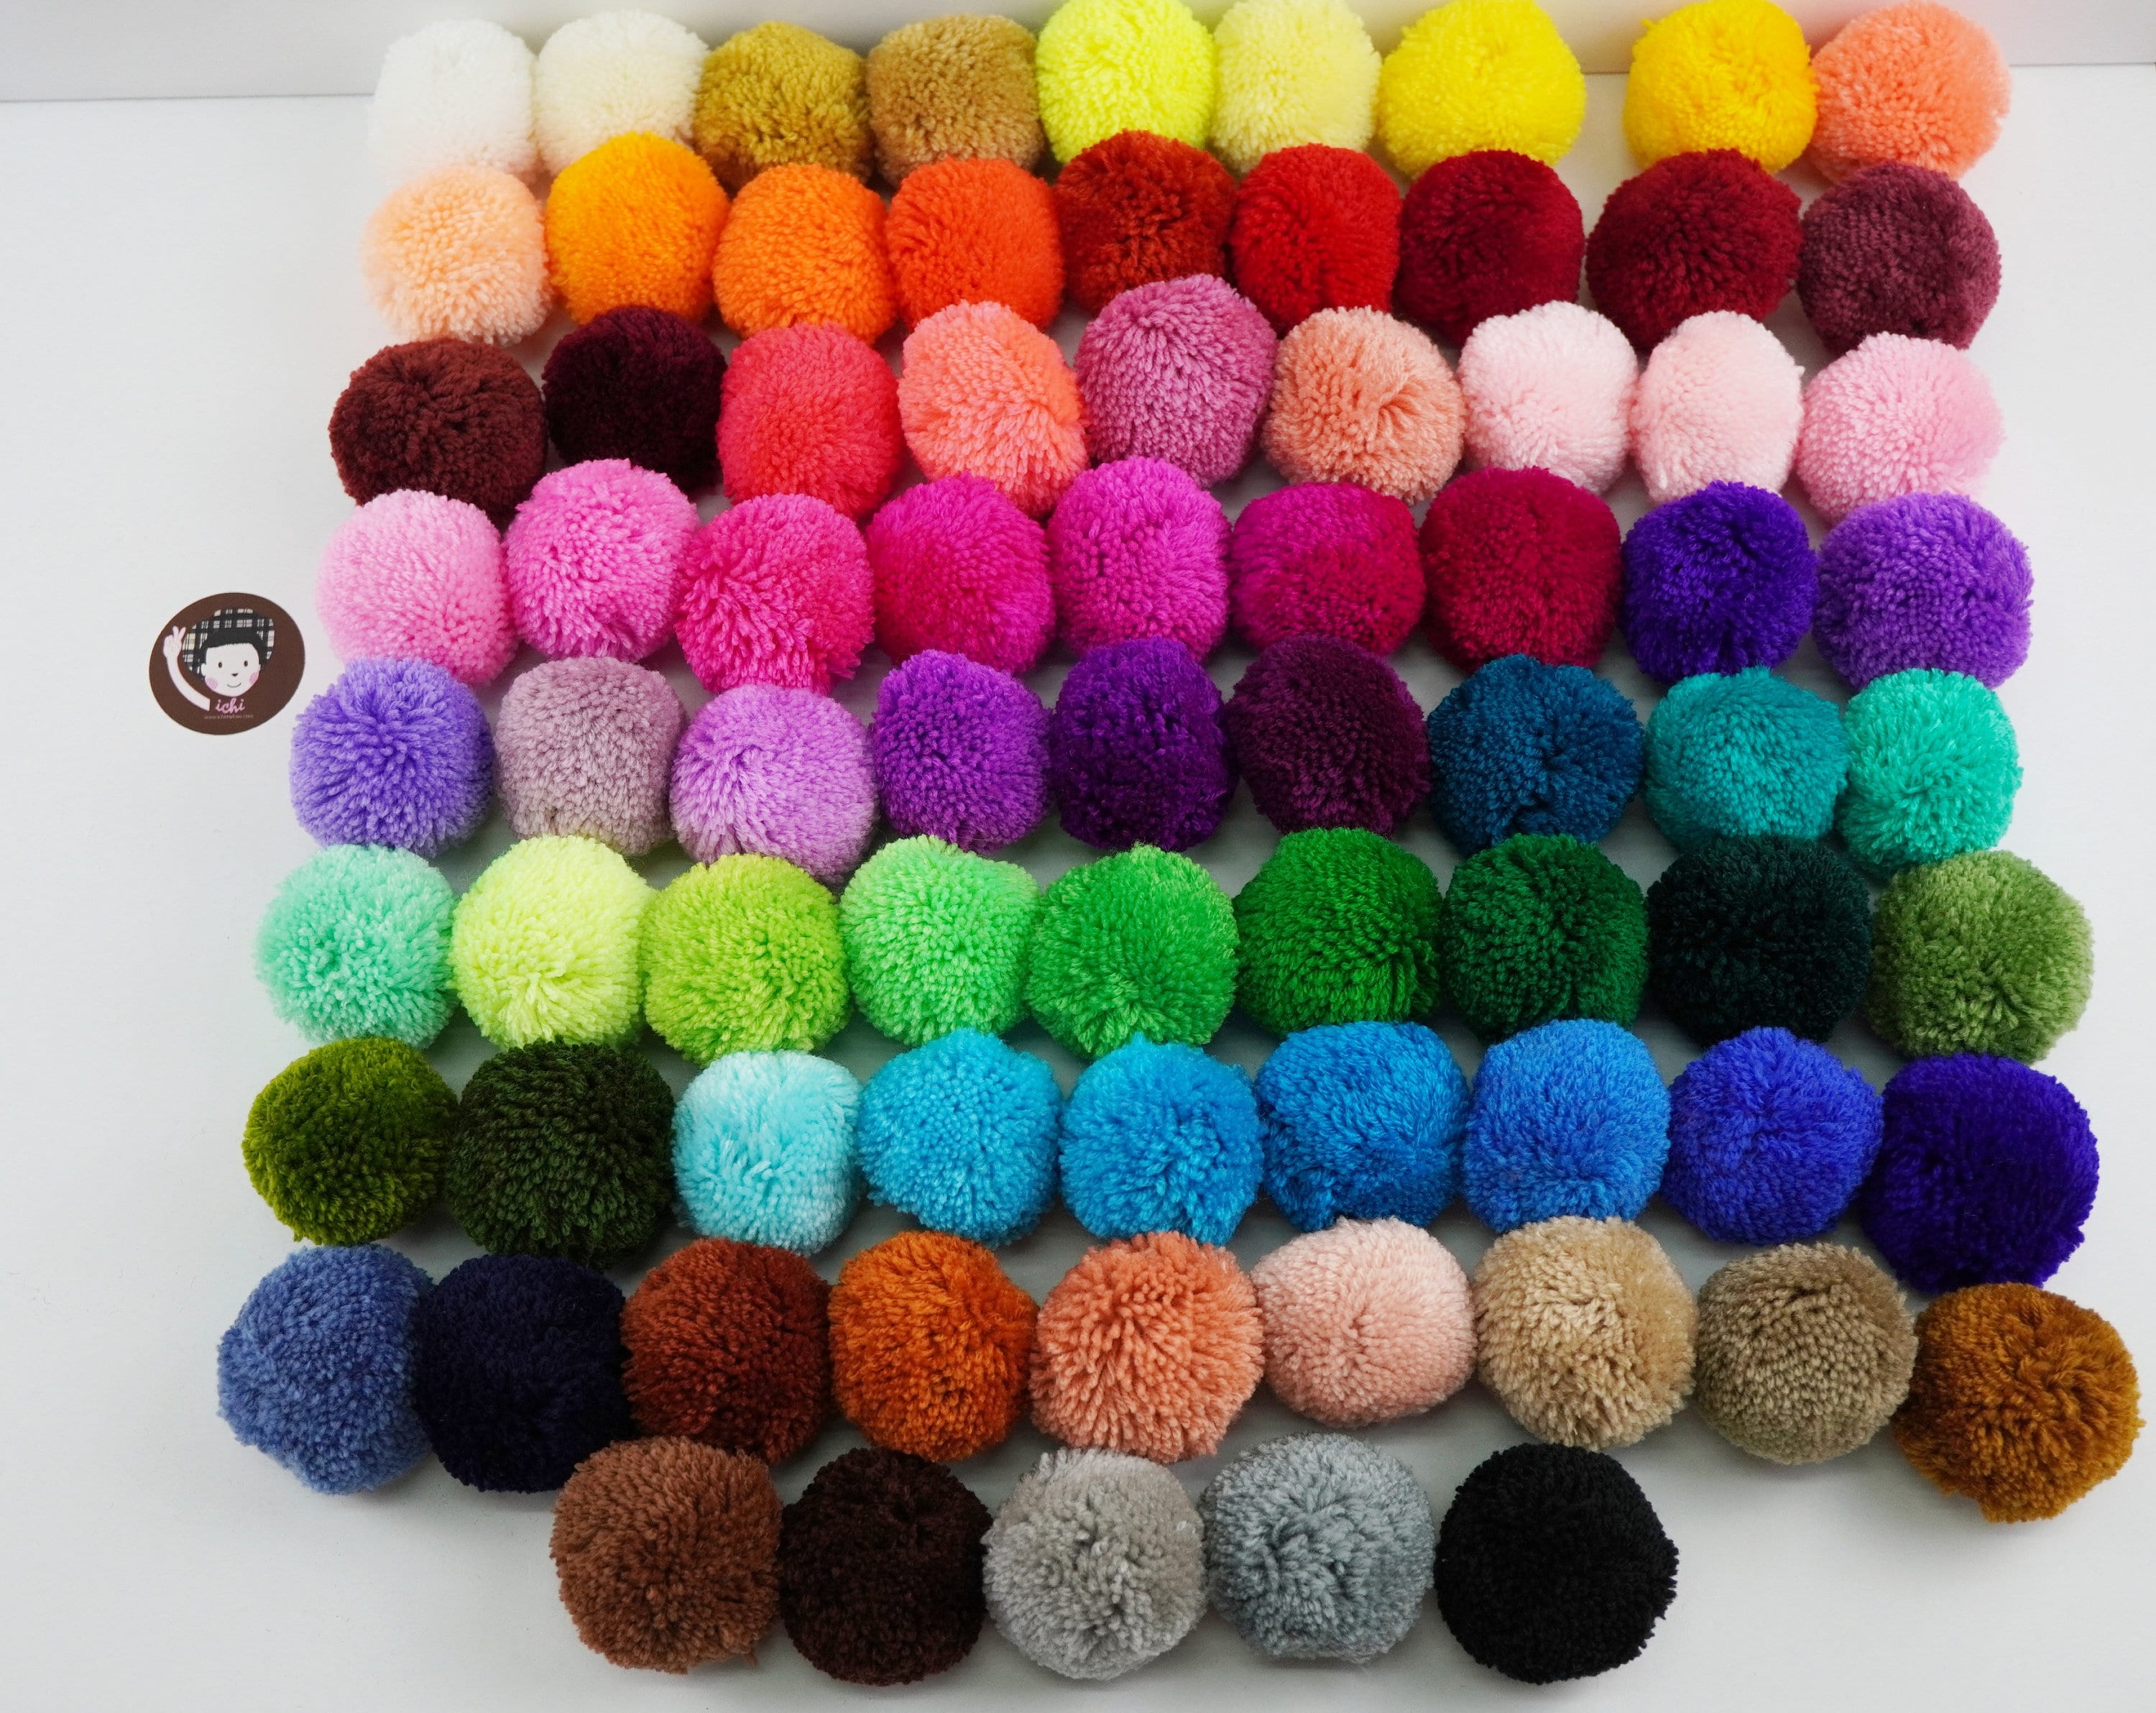 Cotton balls 1.5 inch assorted pom poms for diy creative crafts decorations  assorted colors 200 pack